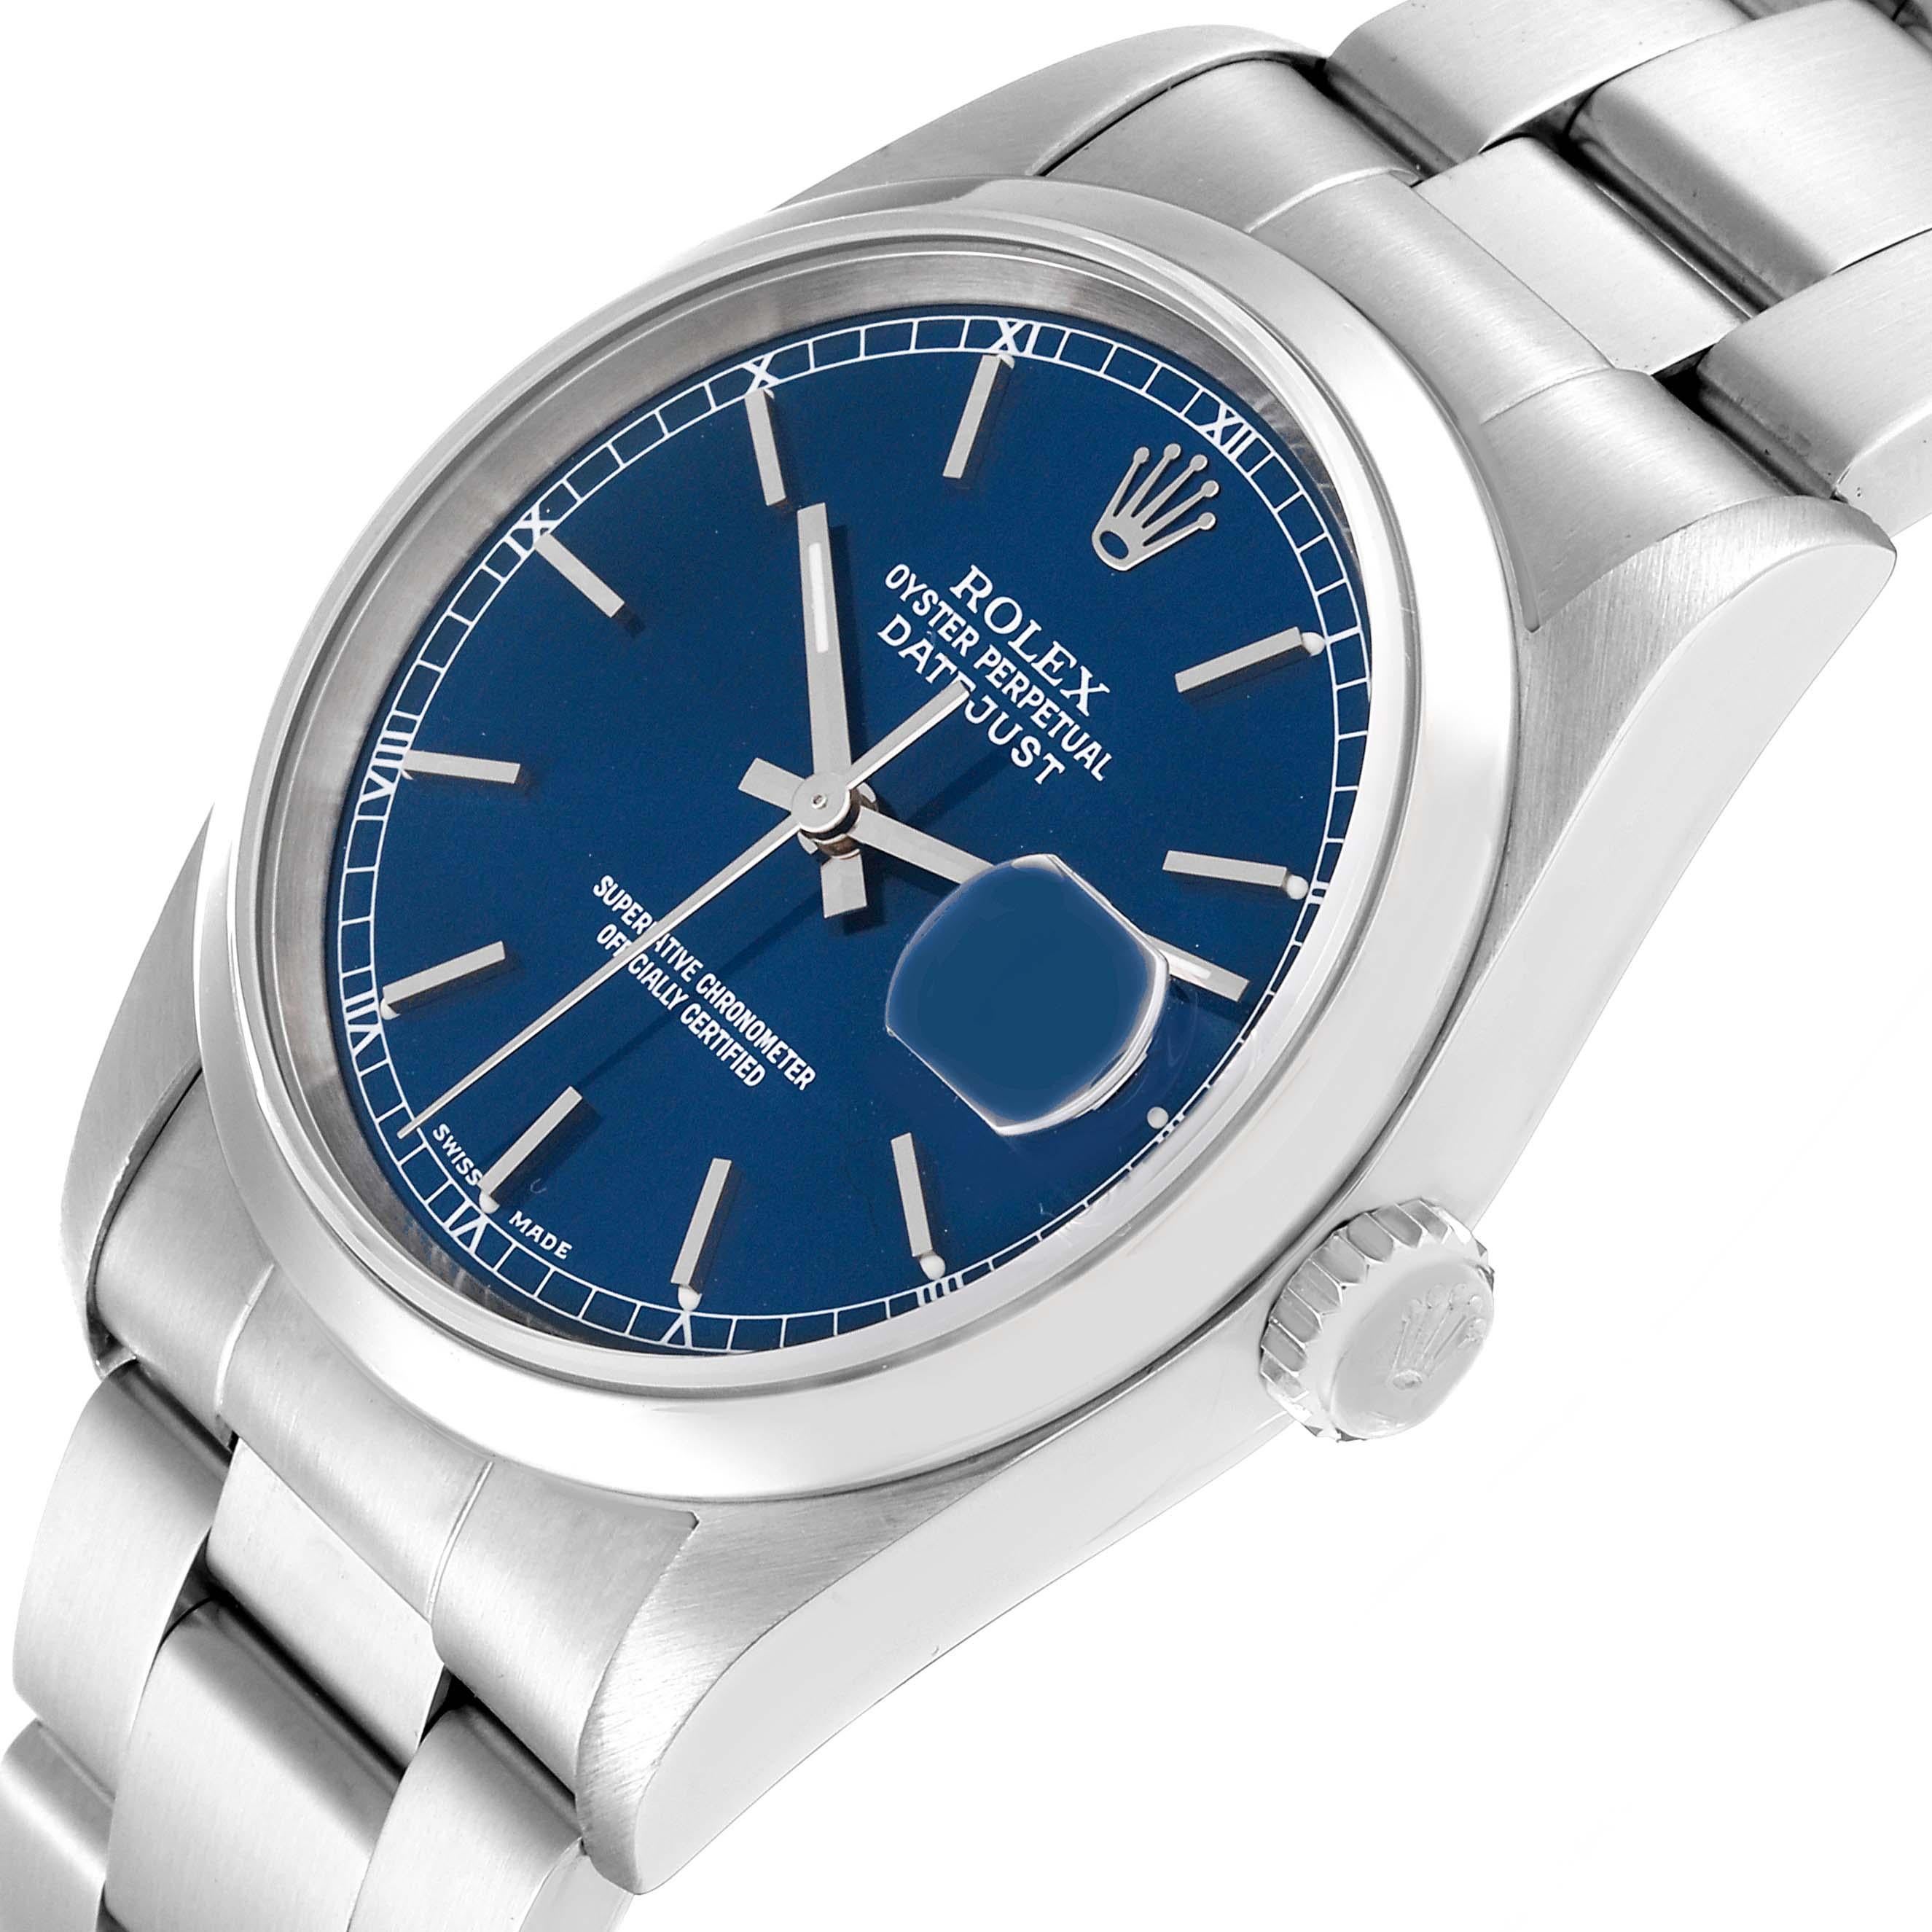 Rolex Datejust Blue Dial Smooth Bezel Steel Mens Watch 16200 Box Papers. Officially certified chronometer automatic self-winding movement with quickset date function. Stainless steel oyster case 36mm in diameter. Rolex logo on the crown. Stainless